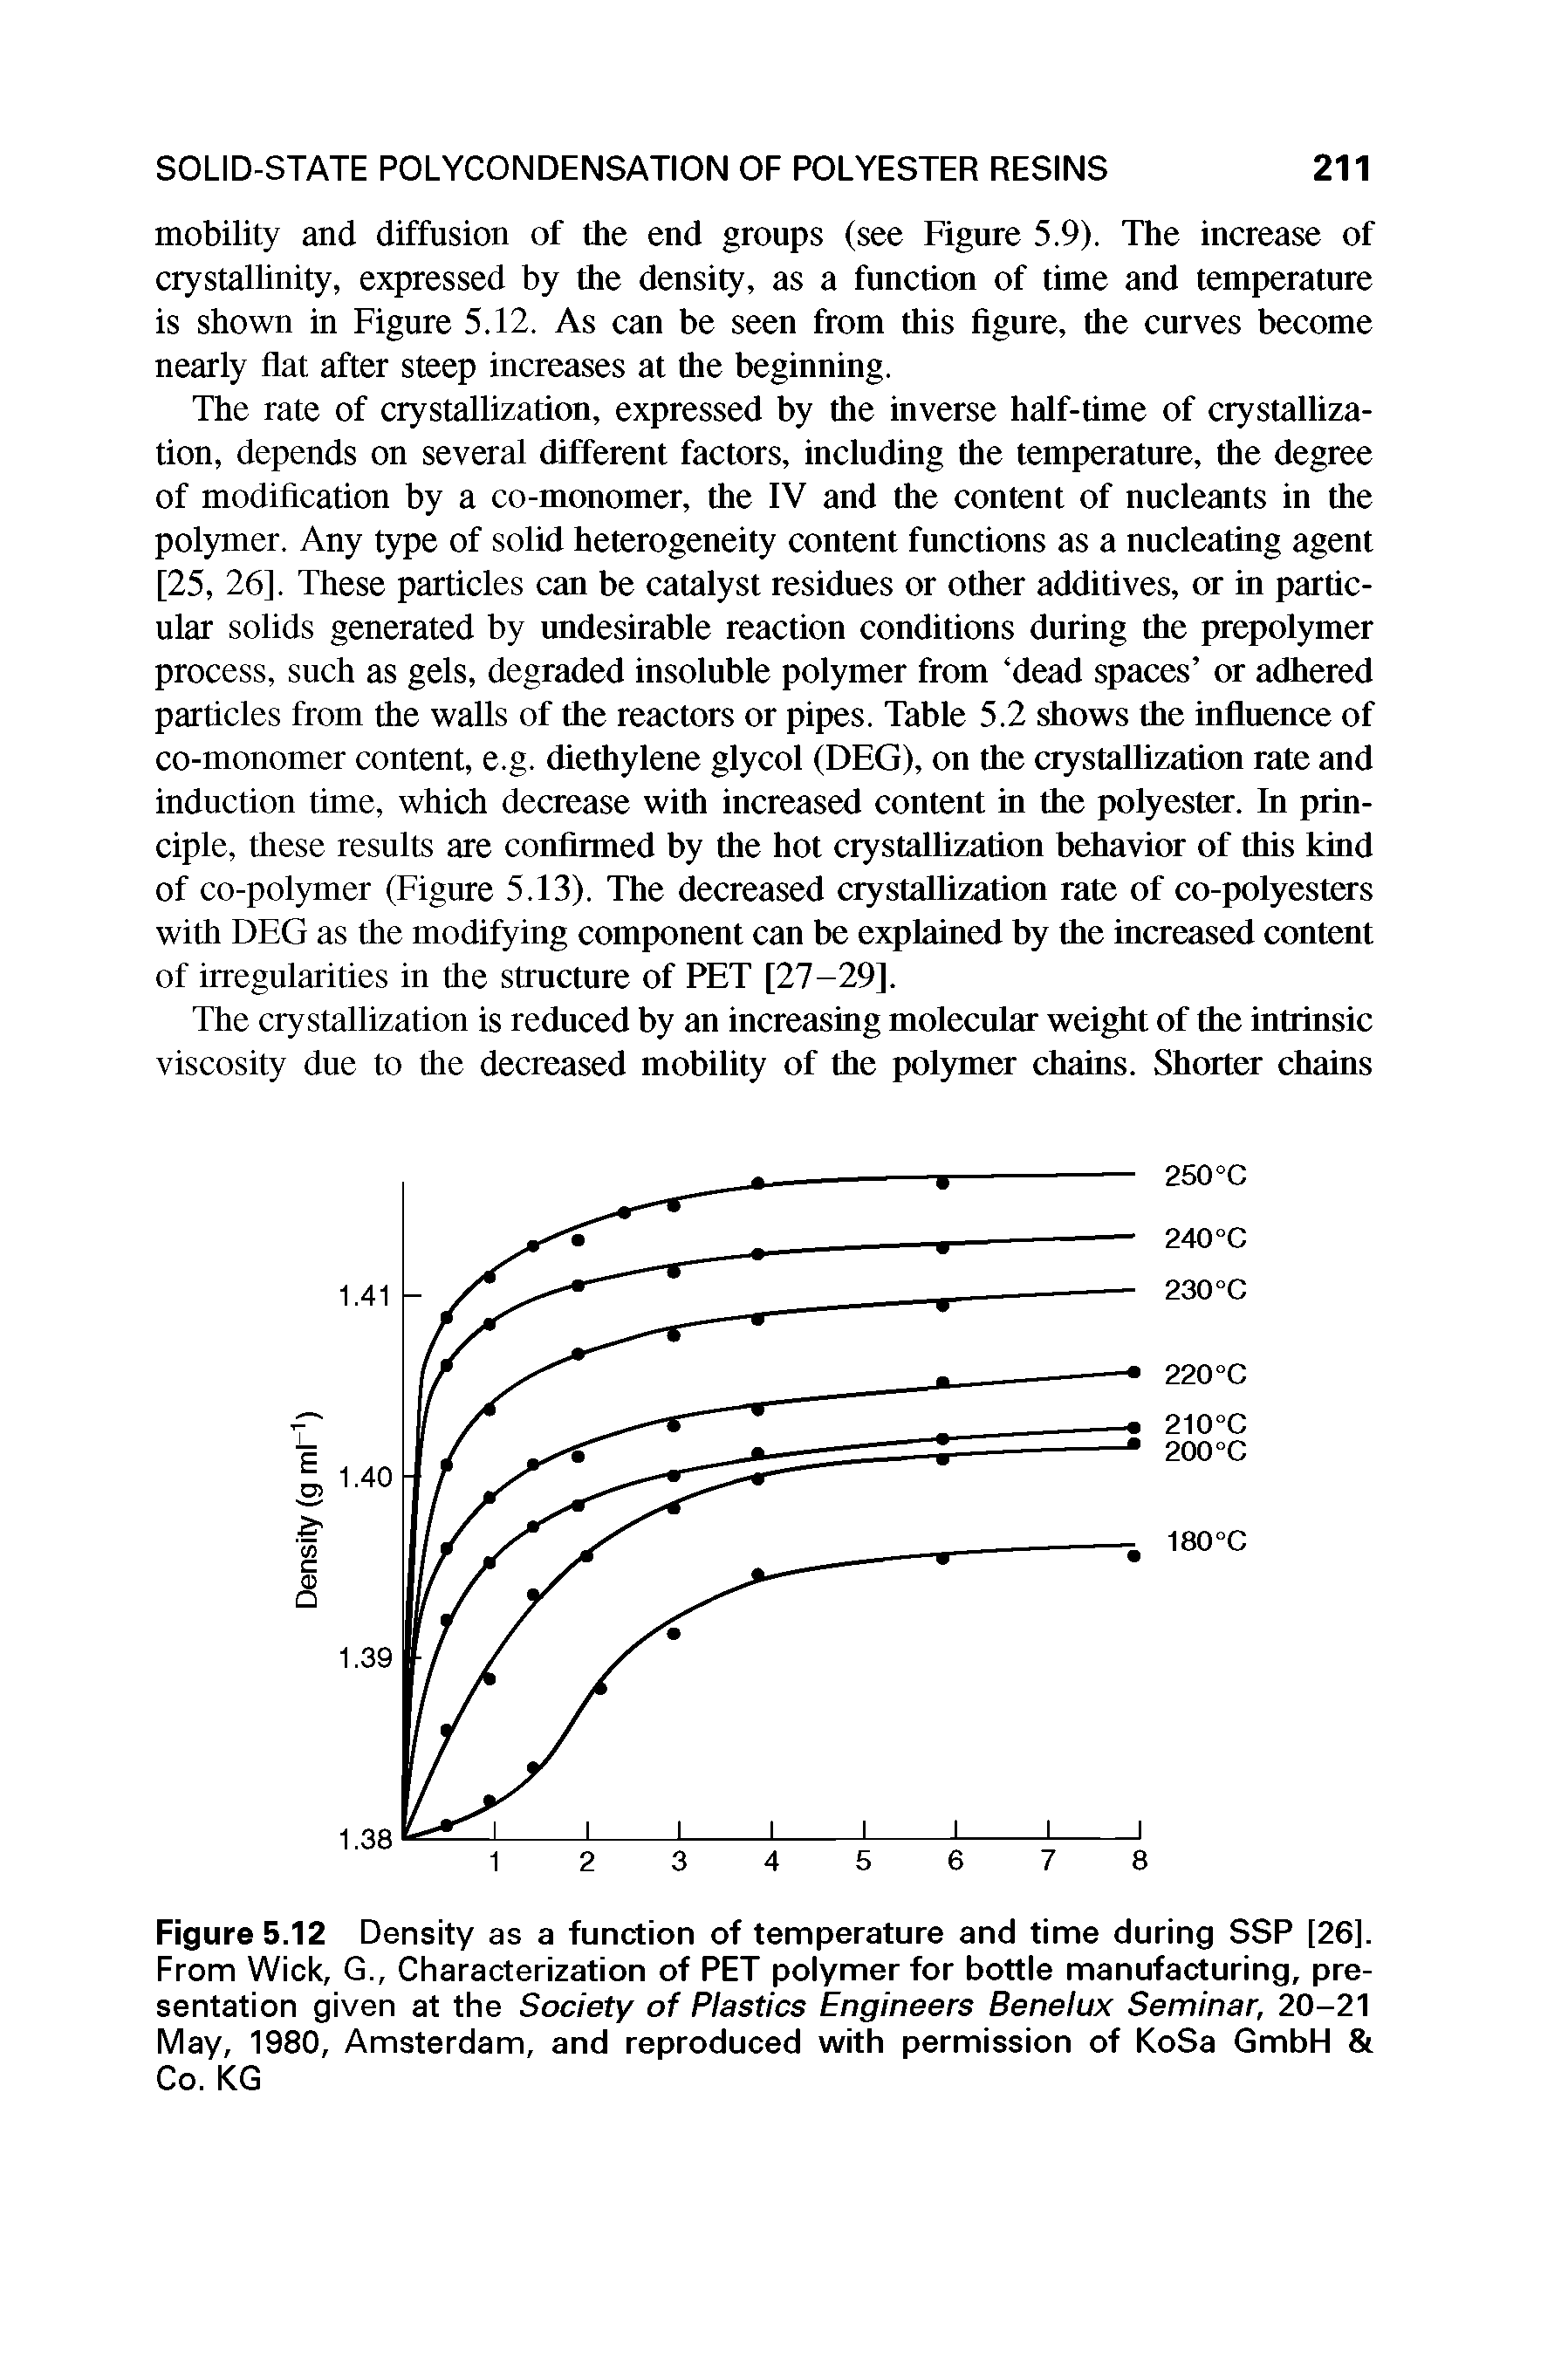 Figure 5.12 Density as a function of temperature and time during SSP [26]. From Wick, G., Characterization of PET polymer for bottle manufacturing, presentation given at the Society of Plastics Engineers Benelux Seminar, 20-21 May, 1980, Amsterdam, and reproduced with permission of KoSa GmbH Co. KG...